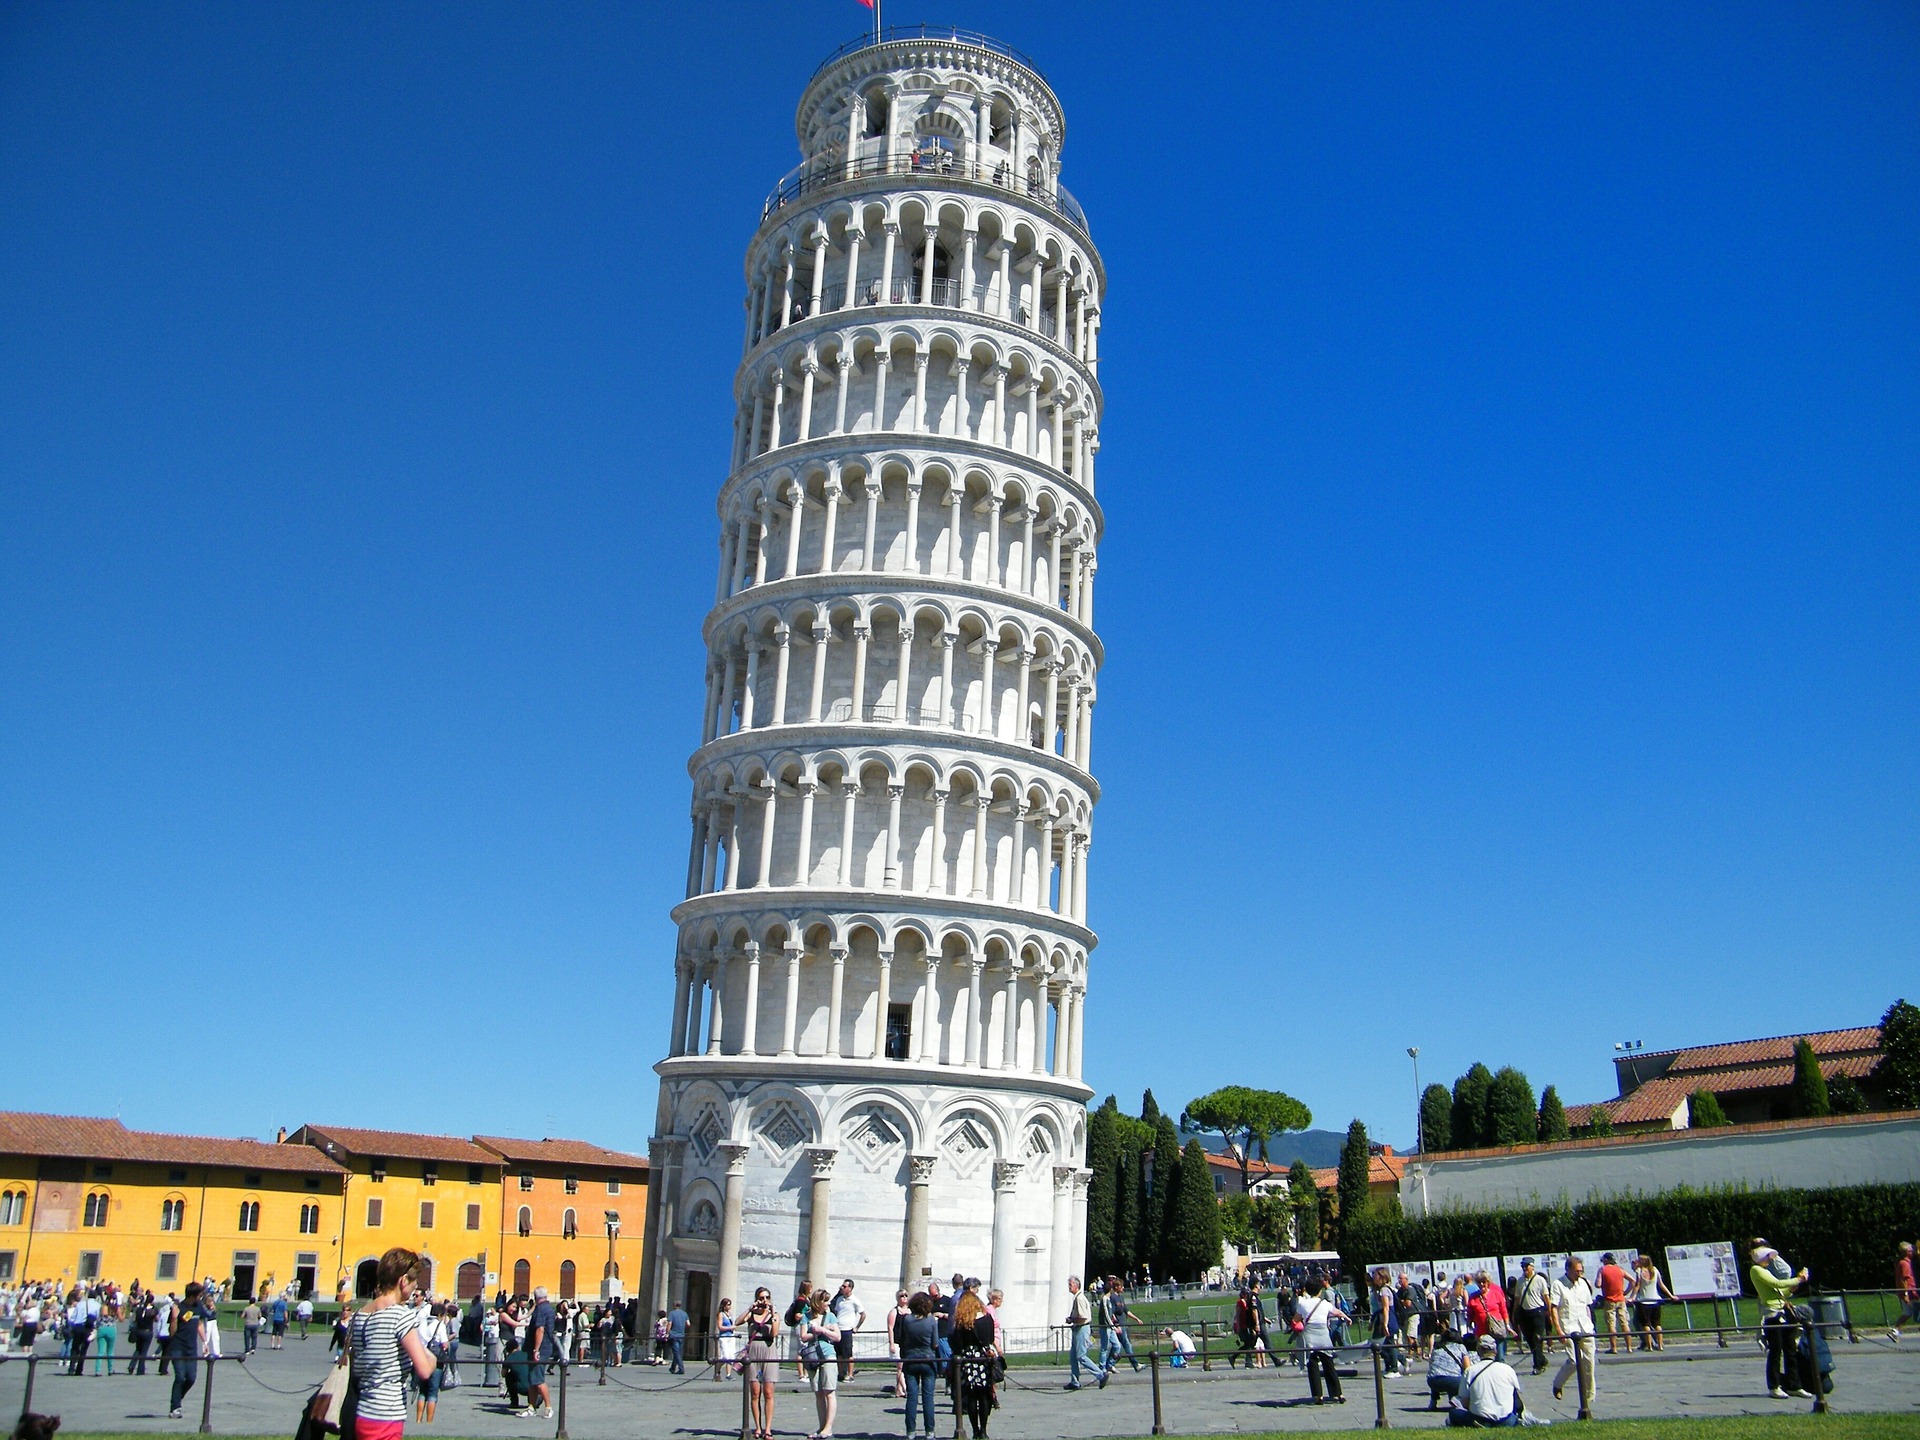 Planning a Trip to Italy: The Leaning Tower of Pisa